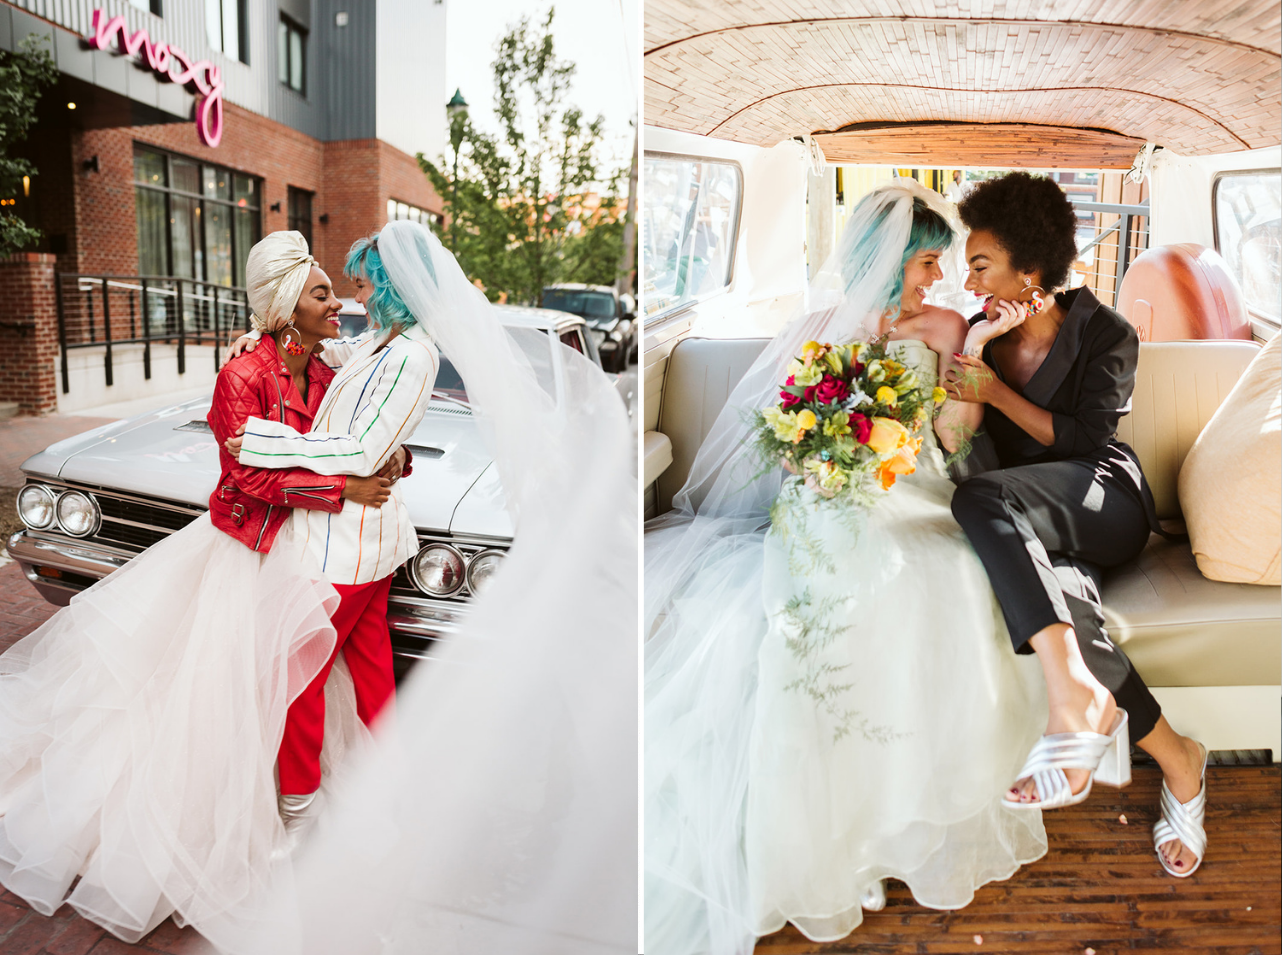 The brides sit together, embracing and laughing, inside a vintage VW van.